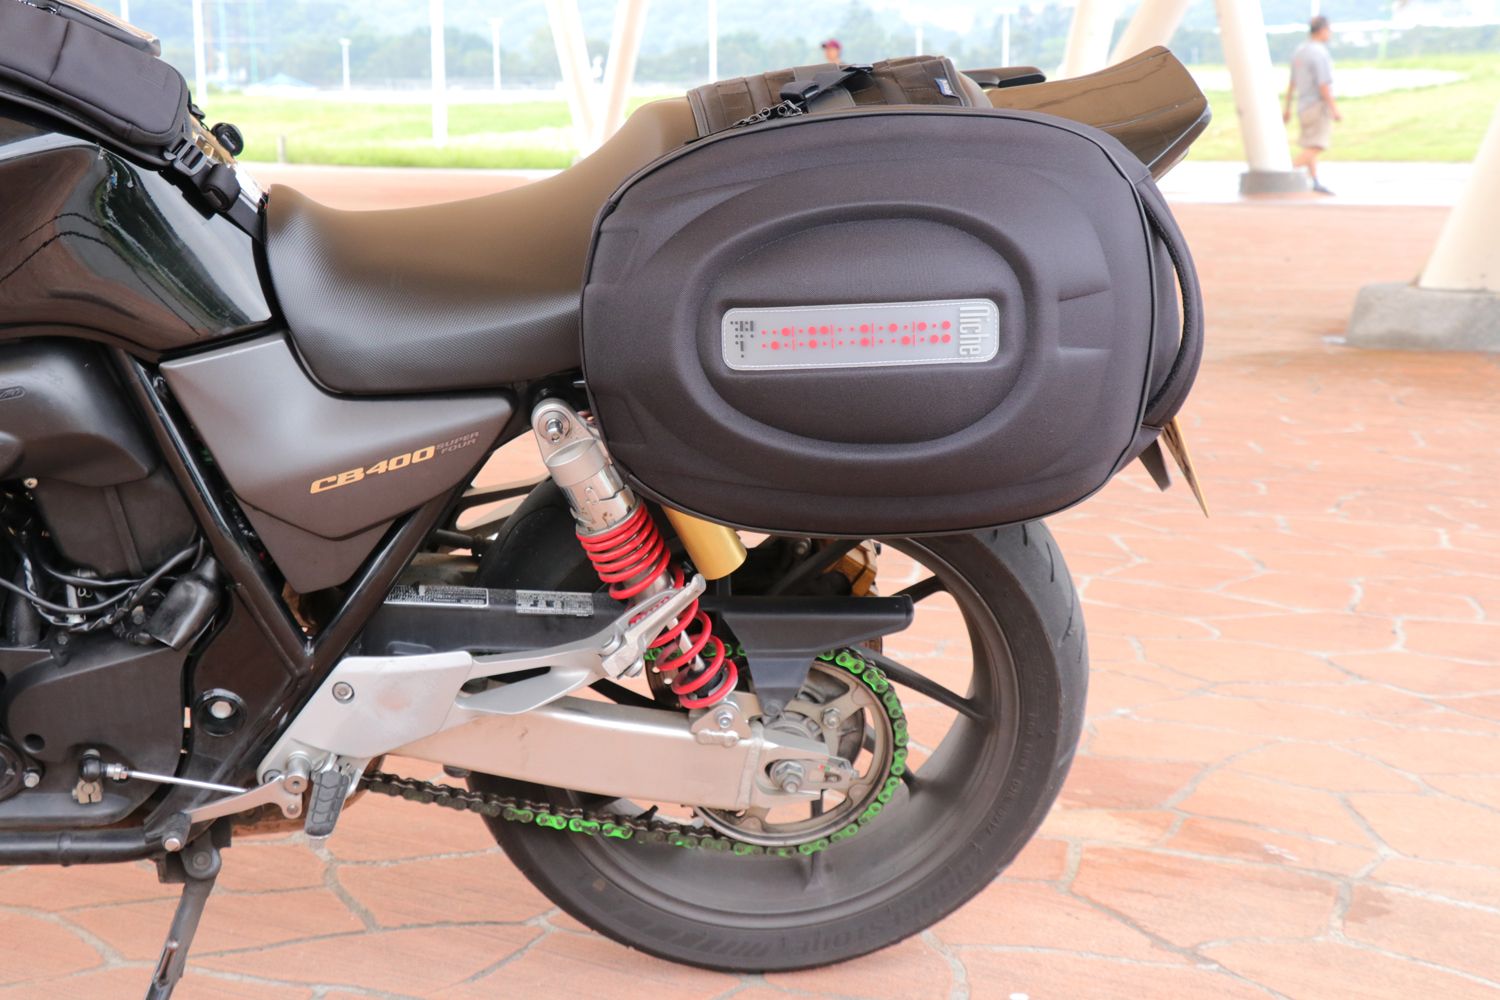 Niche has coolest, most innovative motorcycle bags, luaage, backpacks for motorcycle riders